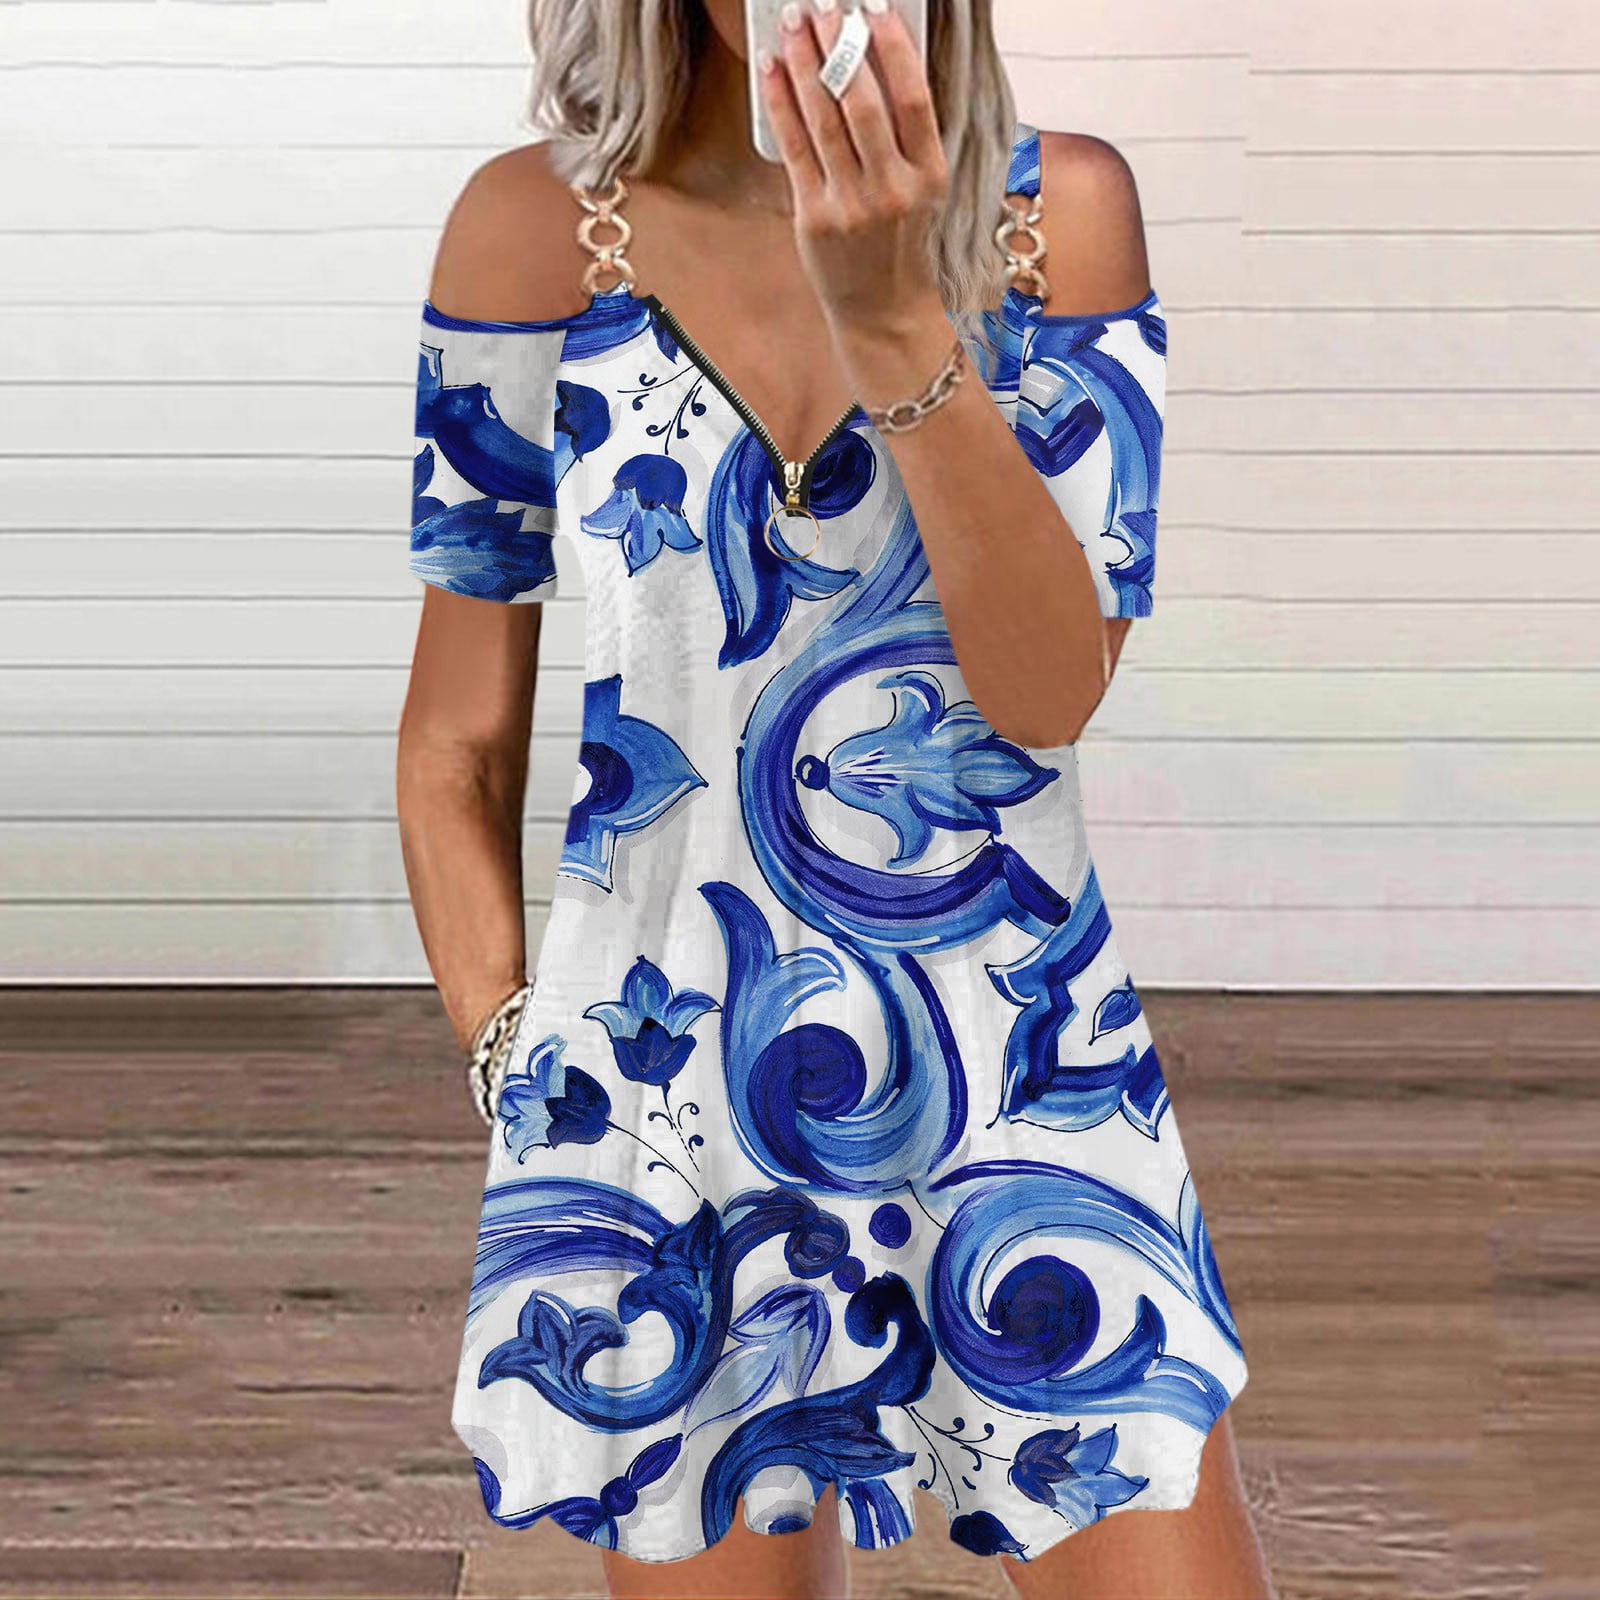 STEADY Ladies Casual Sexy V-neck Printed Dress Floral Pullover A-line Dress  cheap dresses under 10 dollars for women,Black/M 